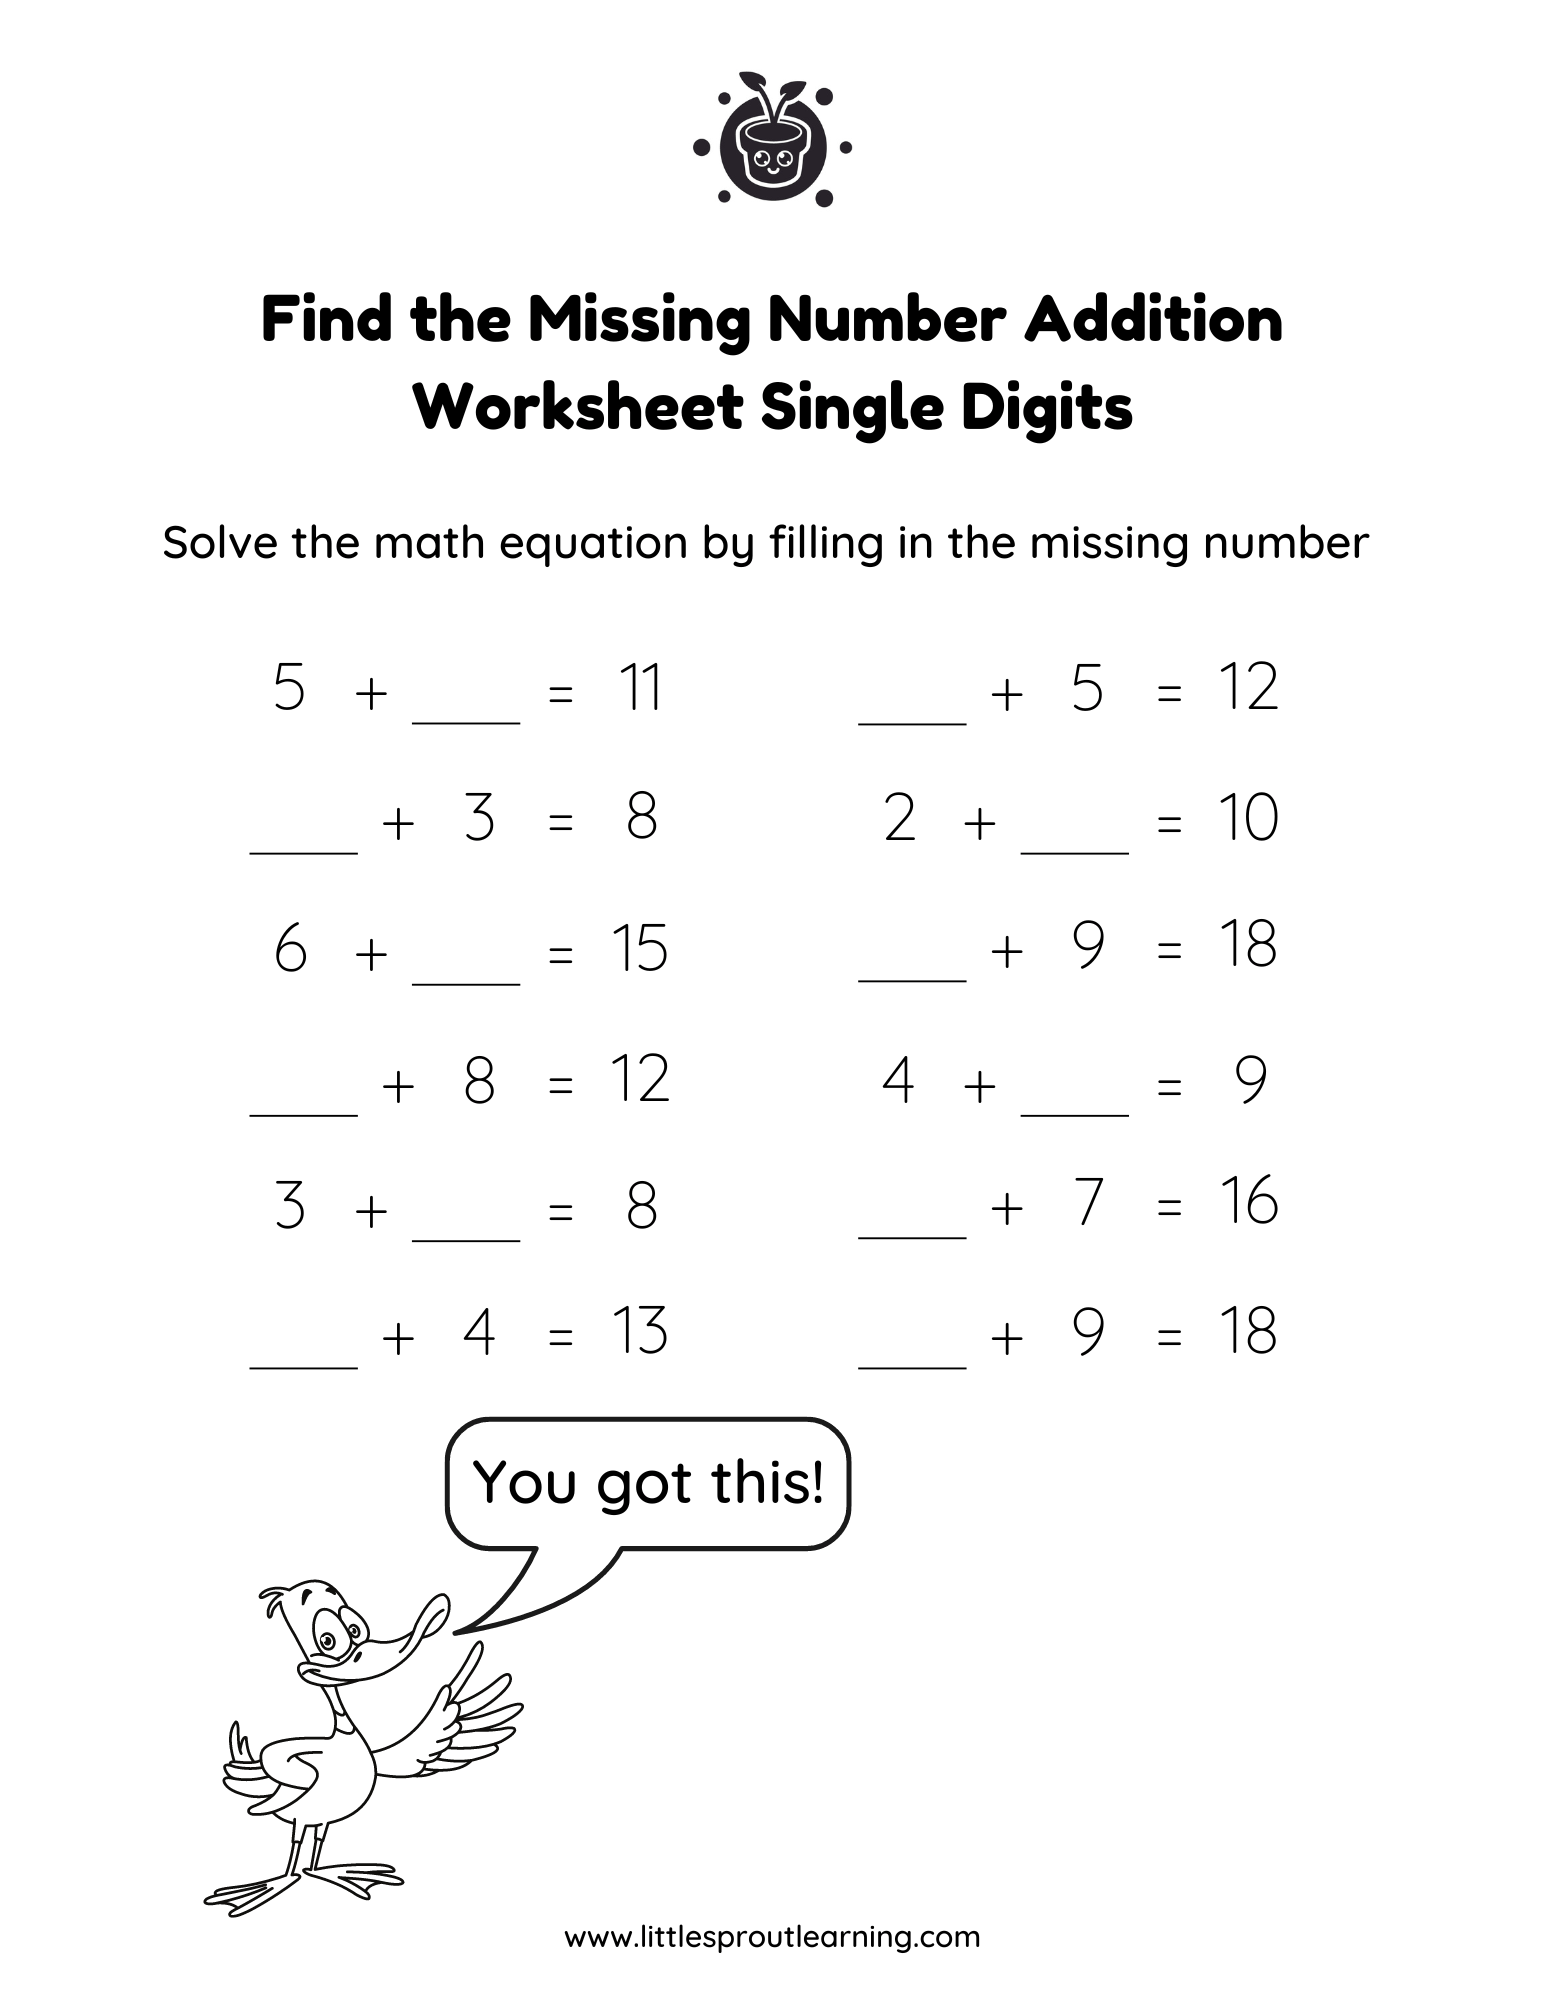 Find the Missing Number Addition Worksheet – Addition With Single Digit Numbers